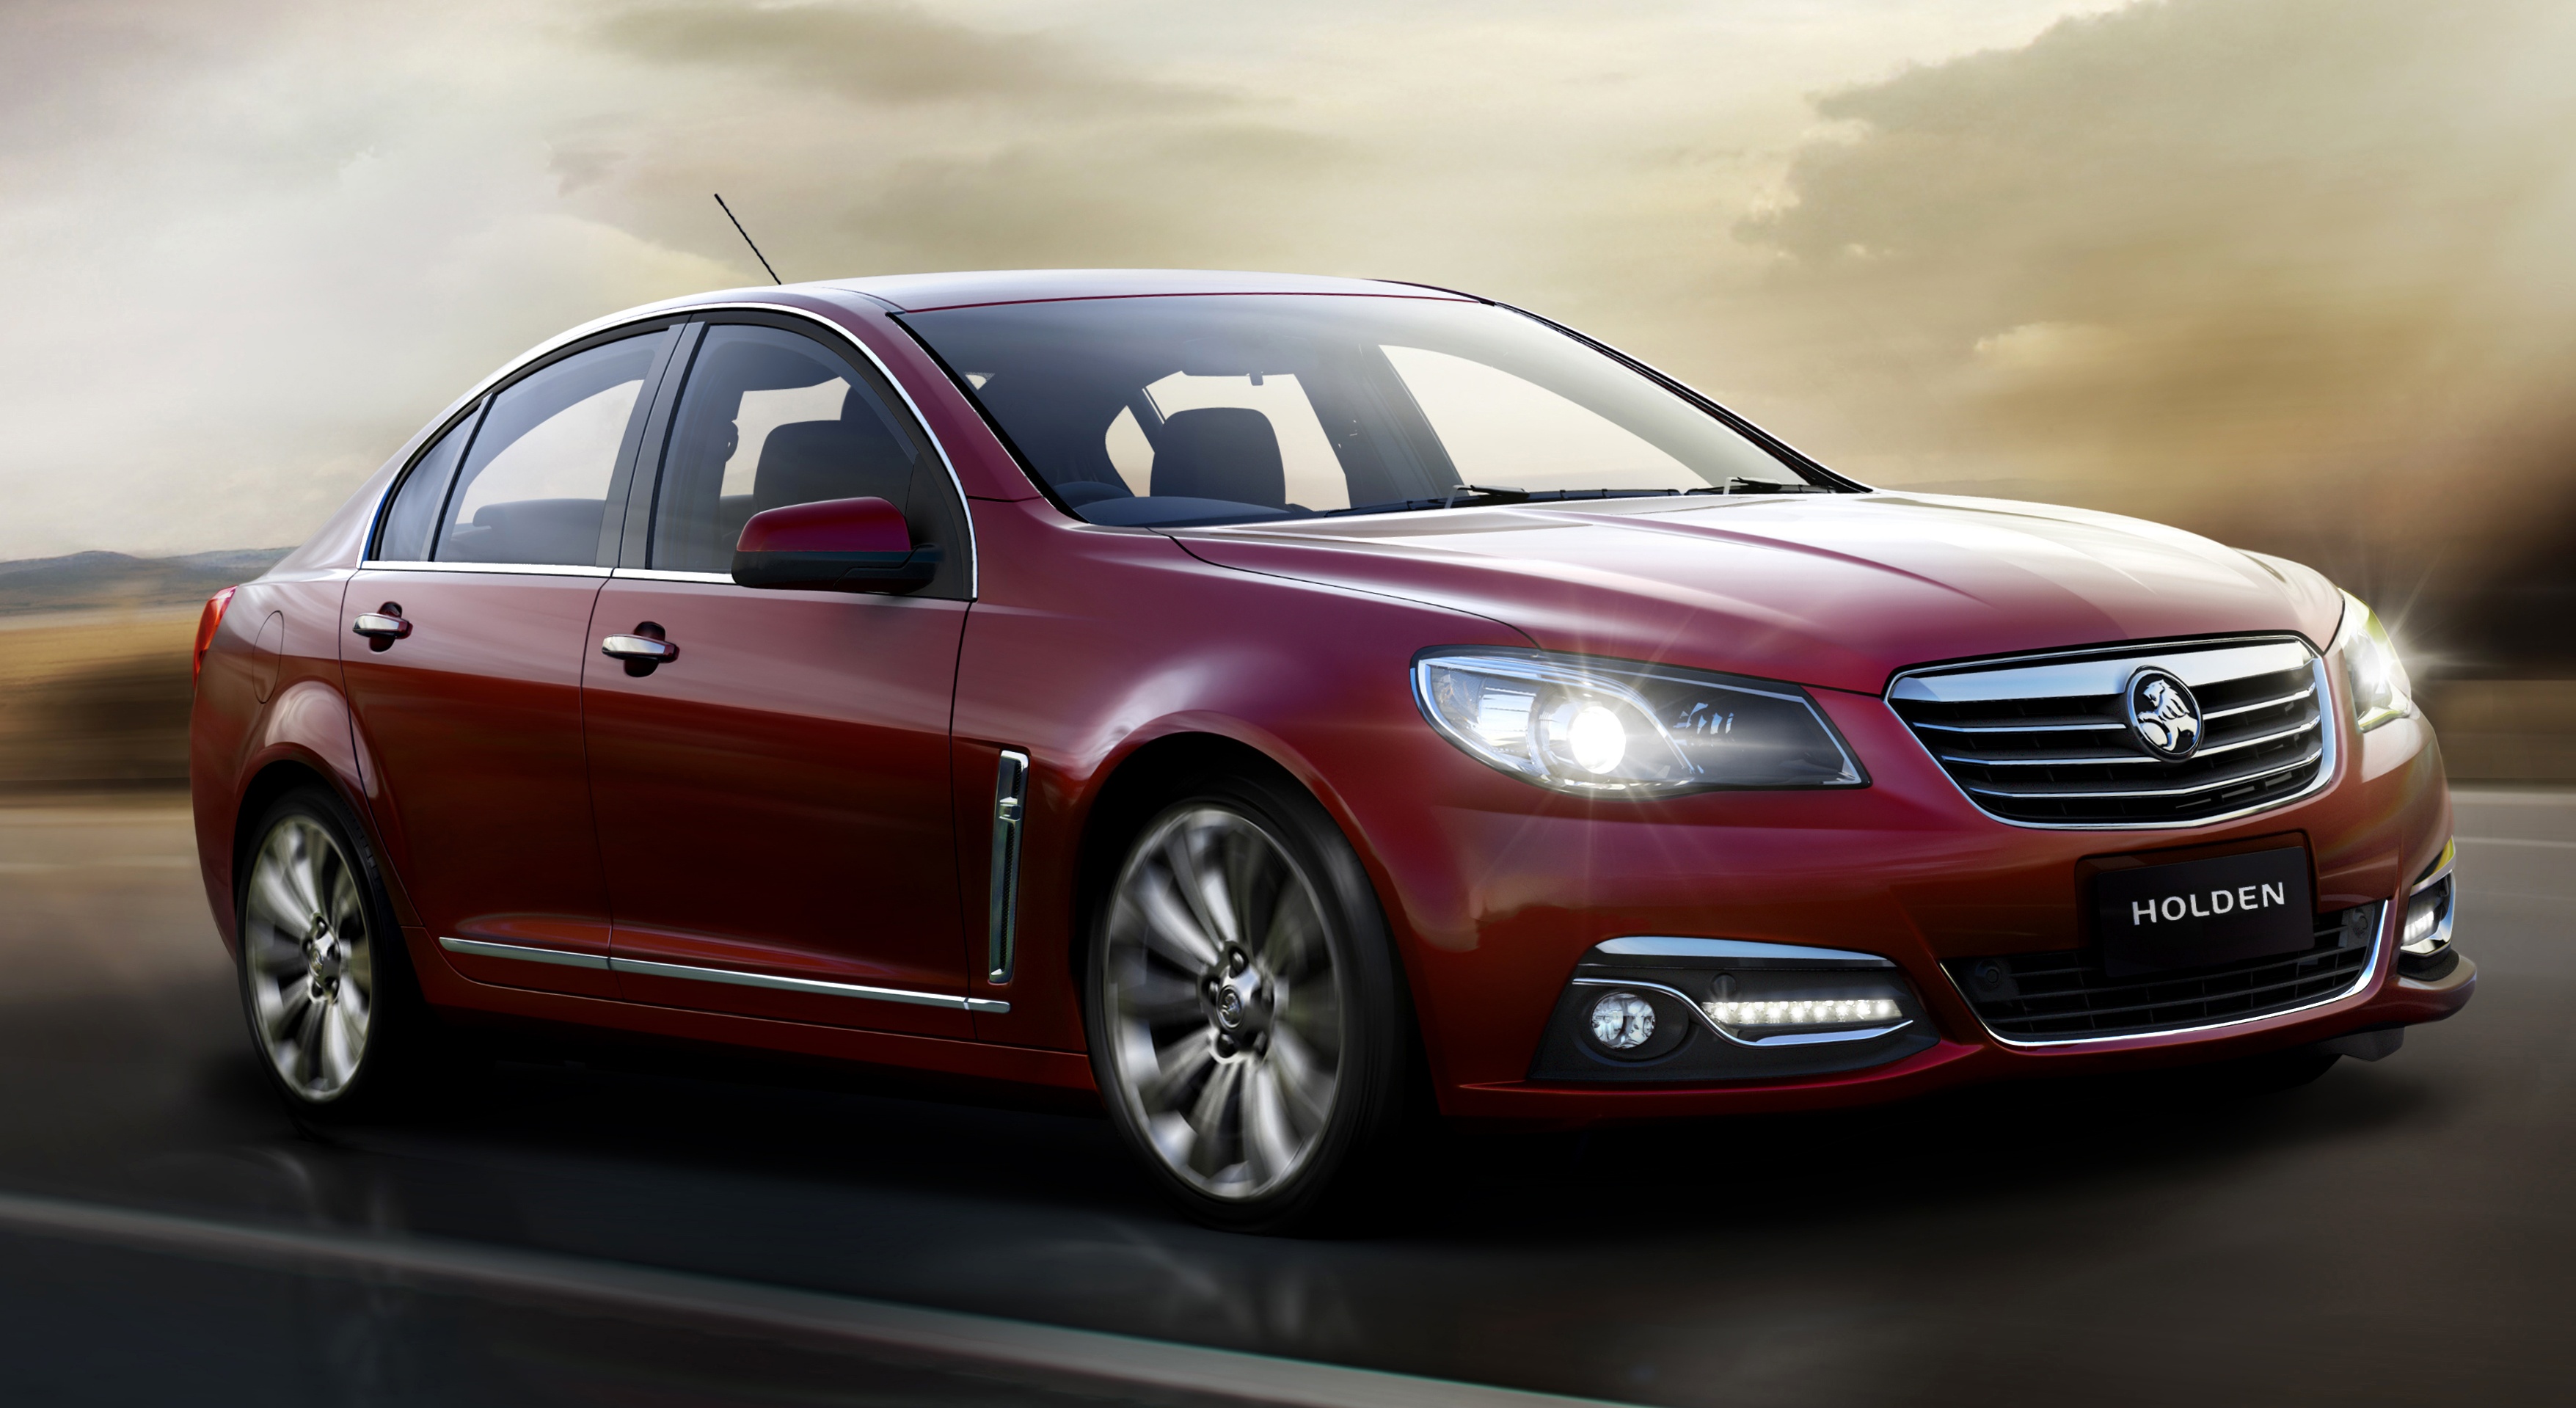 Holden Calais V previewing the new VF Commodore